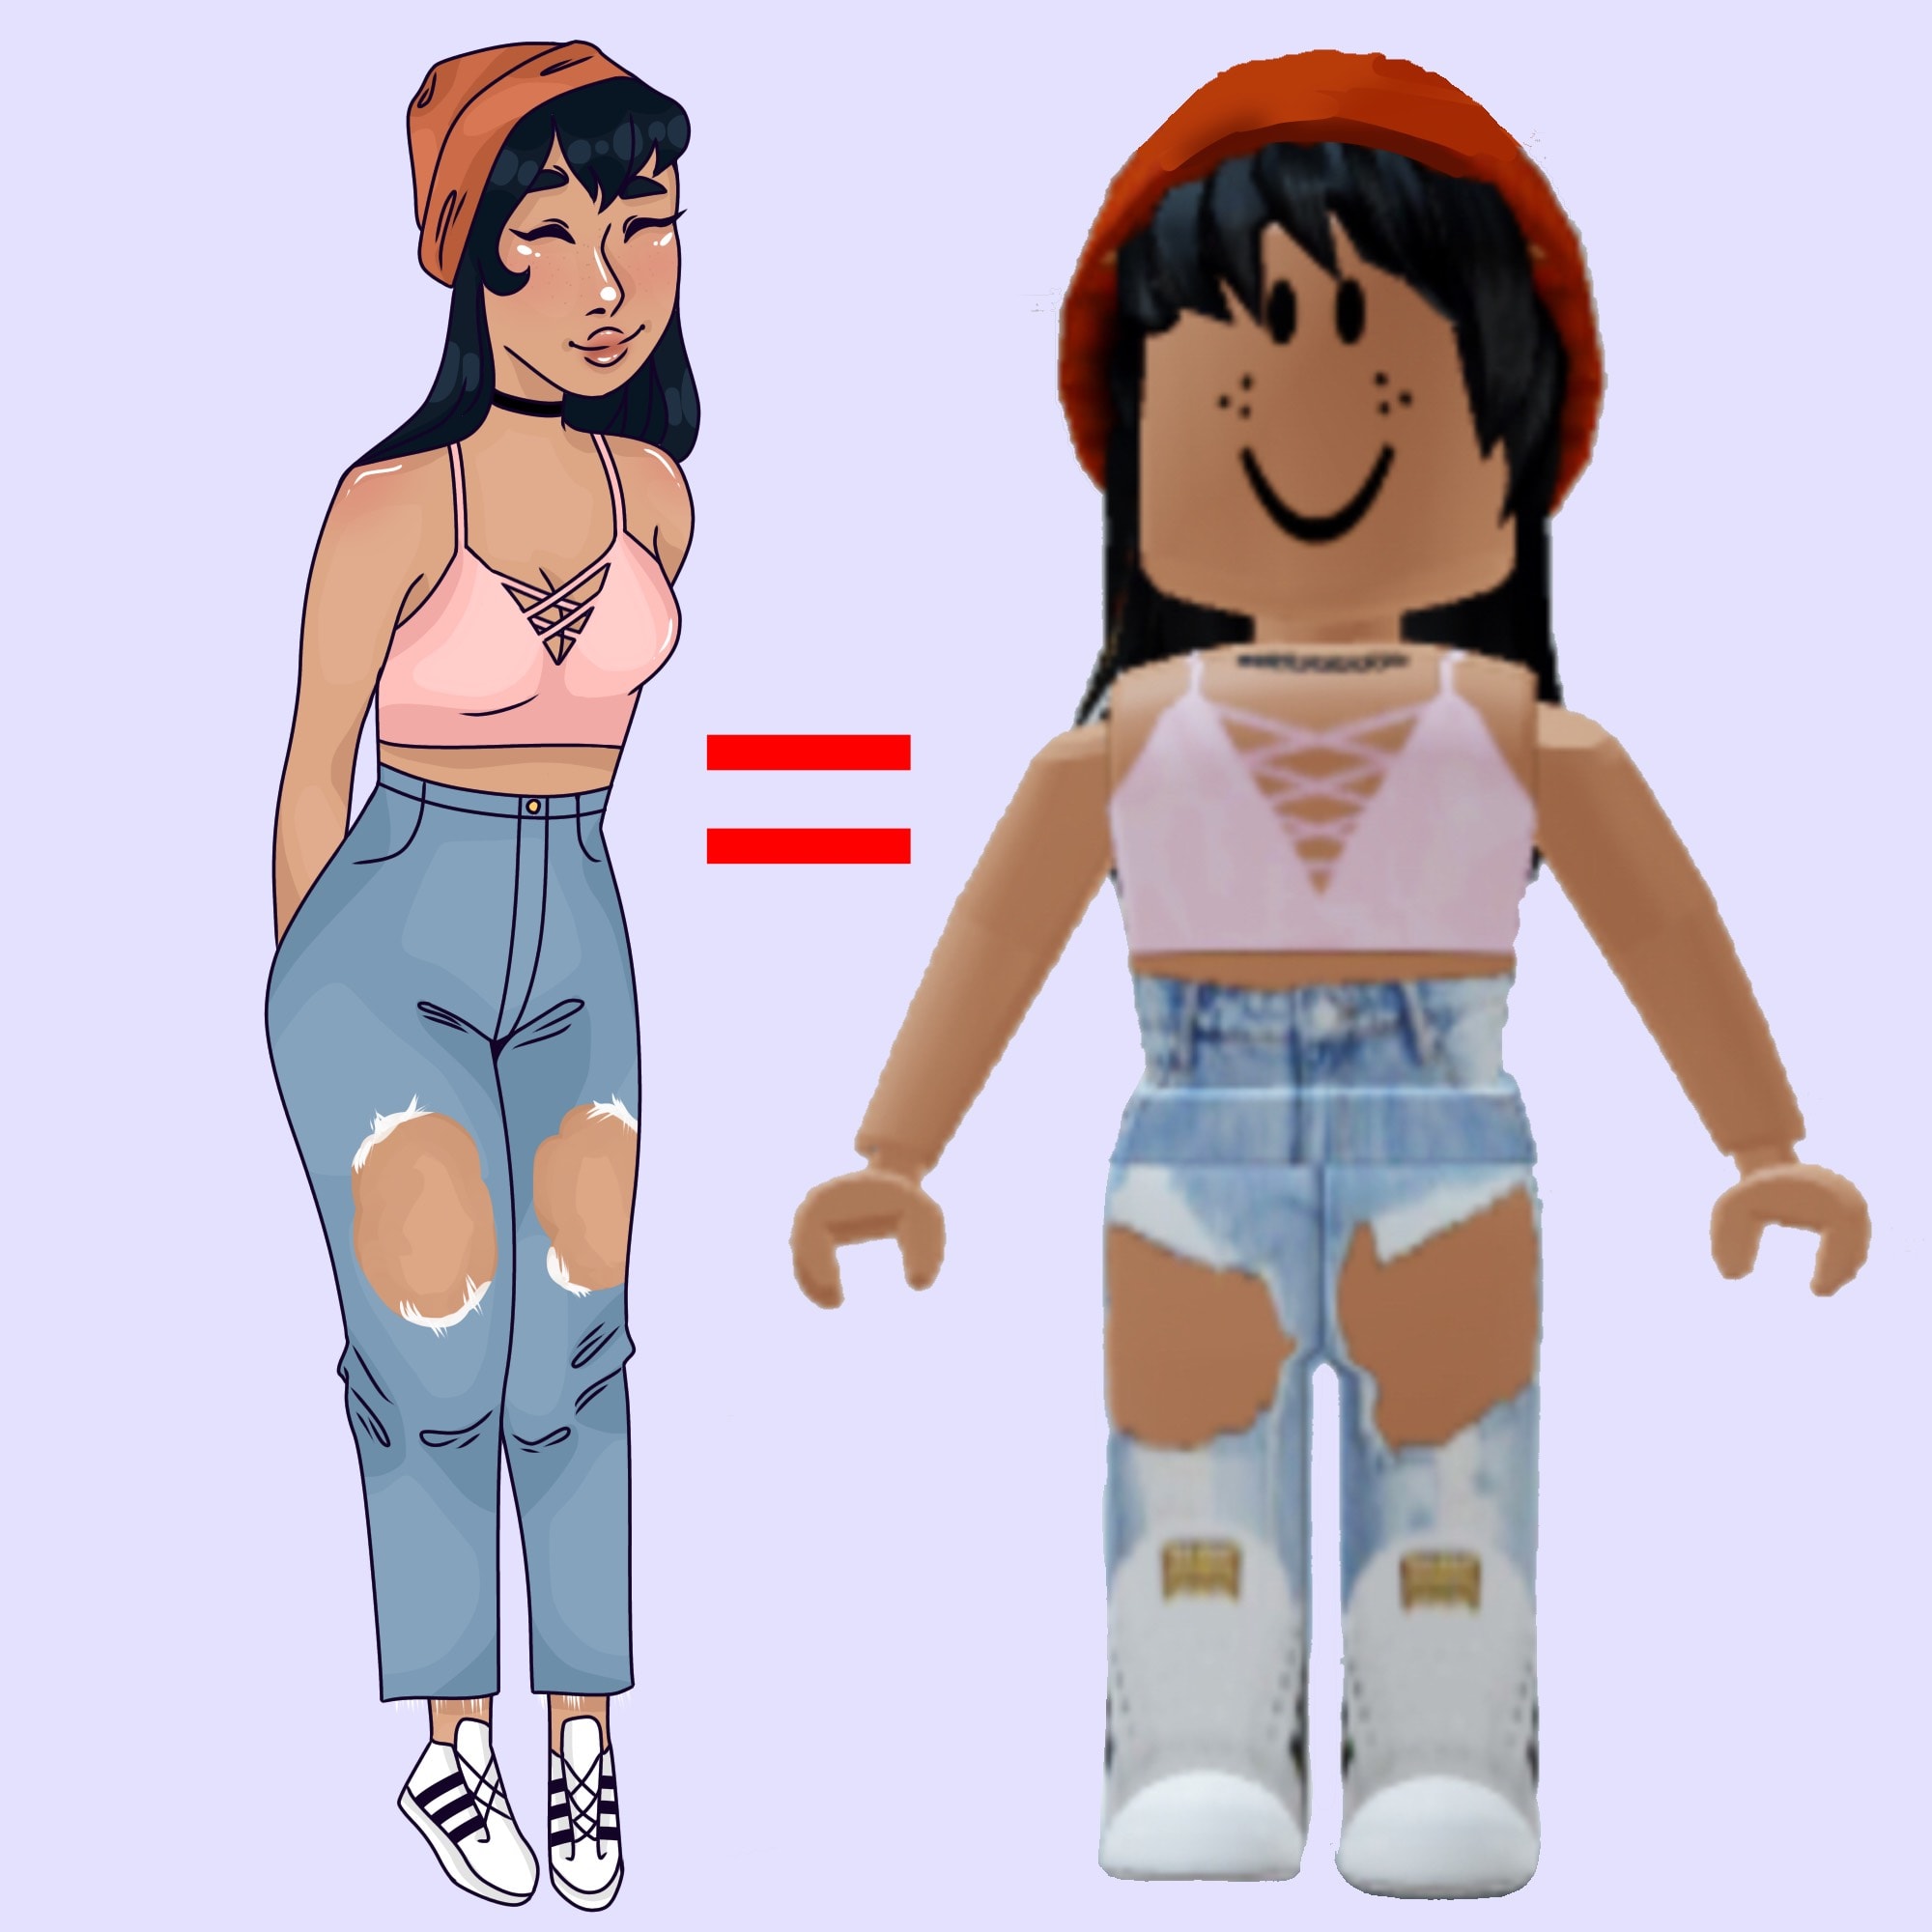 Draw Your Roblox Character In My Style By Natuillustrates Fiverr - how to draw a roblox